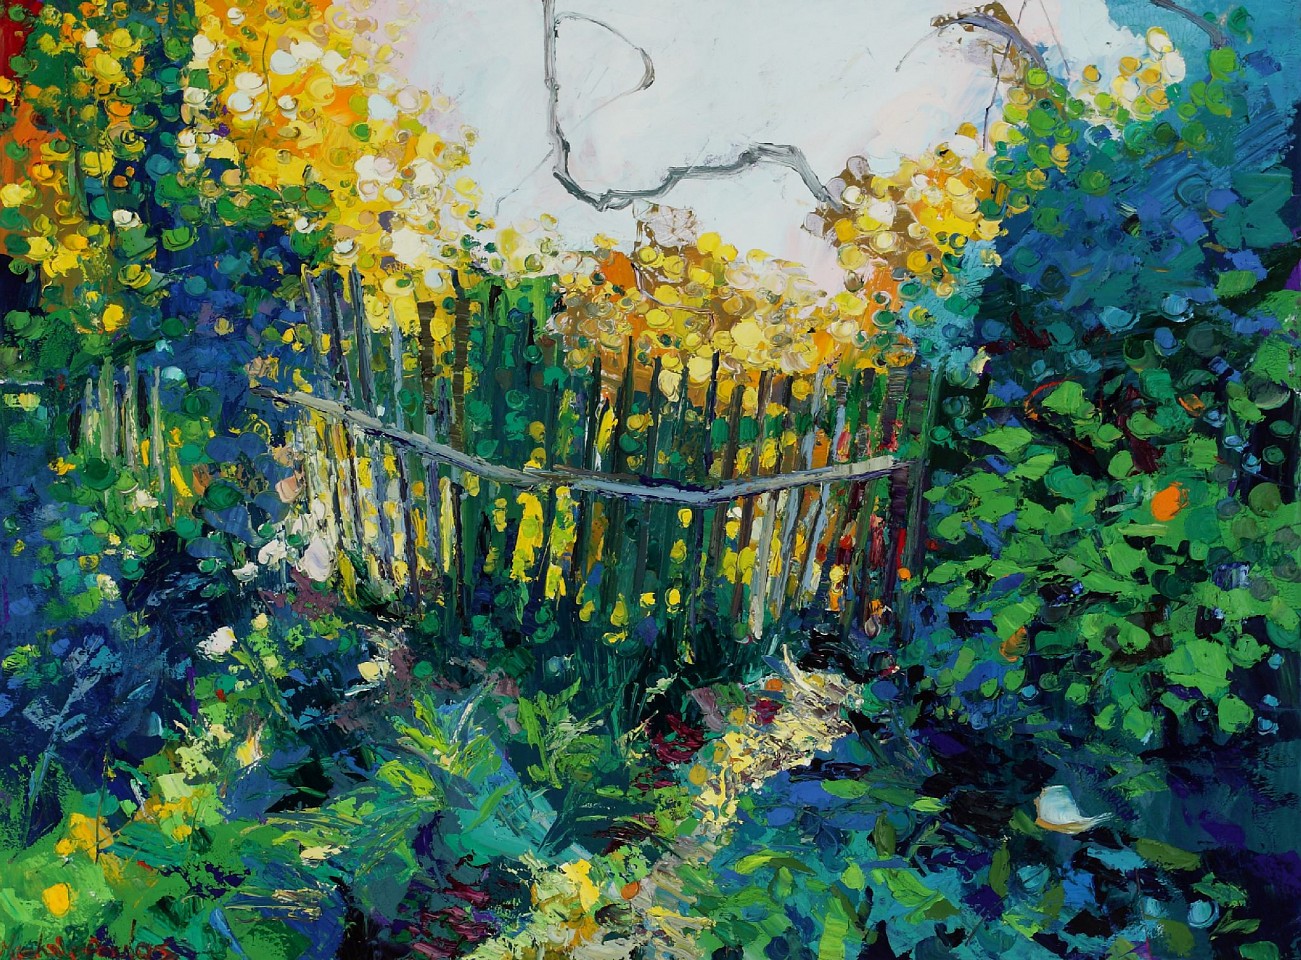 James Michalopoulos, Gates to Green Lovely
oil, 47 x 63 in.
$25,000